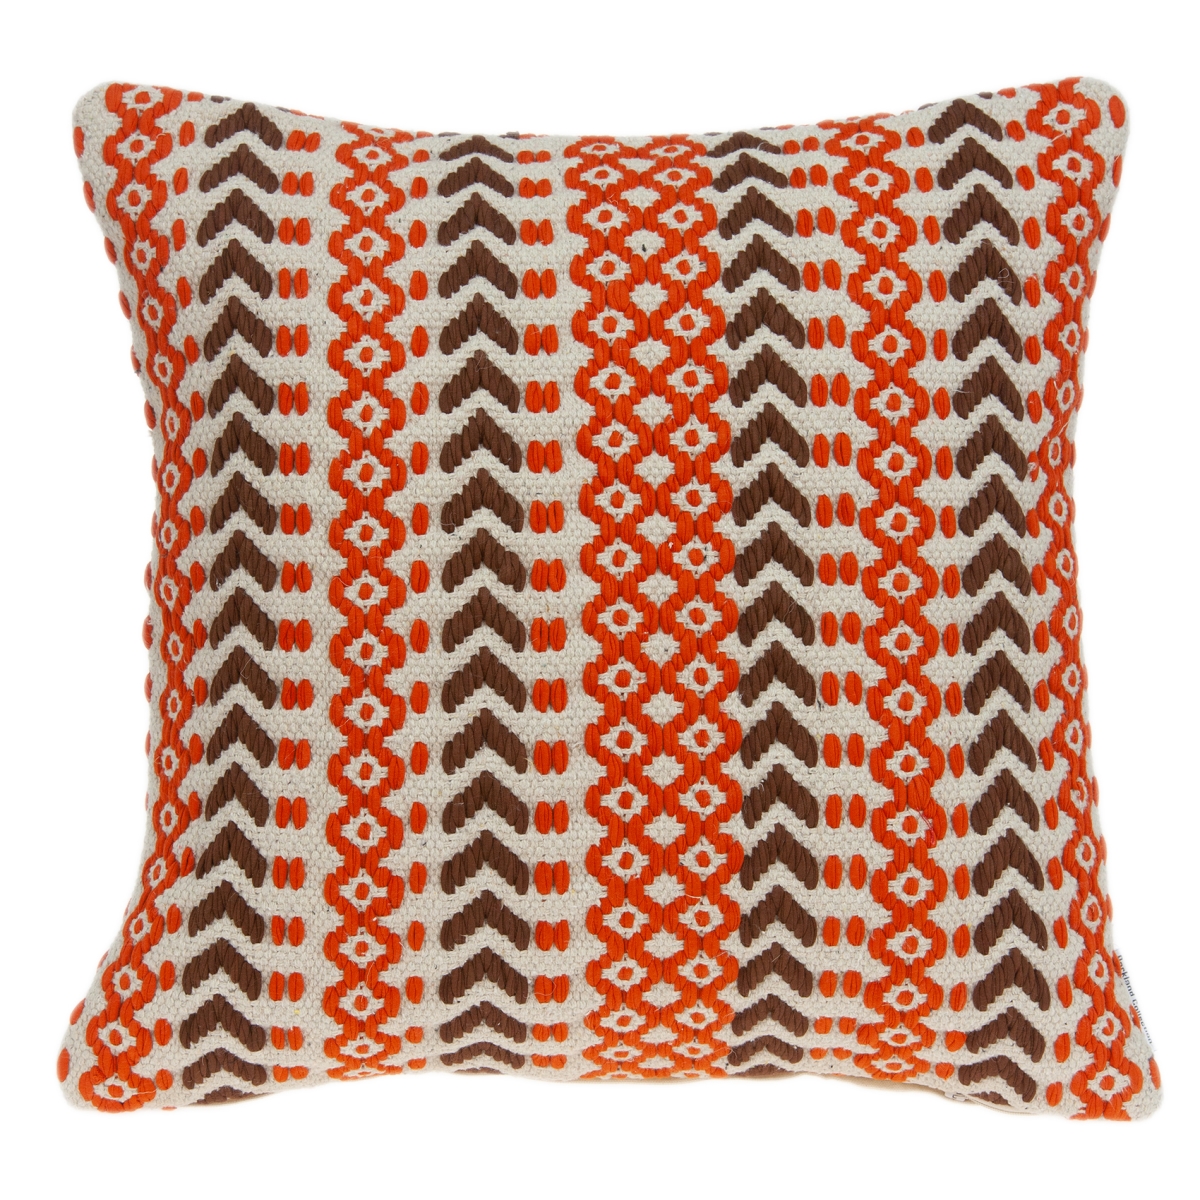 Pild11125d Larka Orange, Tan & Brown Square Bohemian Pillow Cover With Down Insert - 20 X 20 X 7 In.